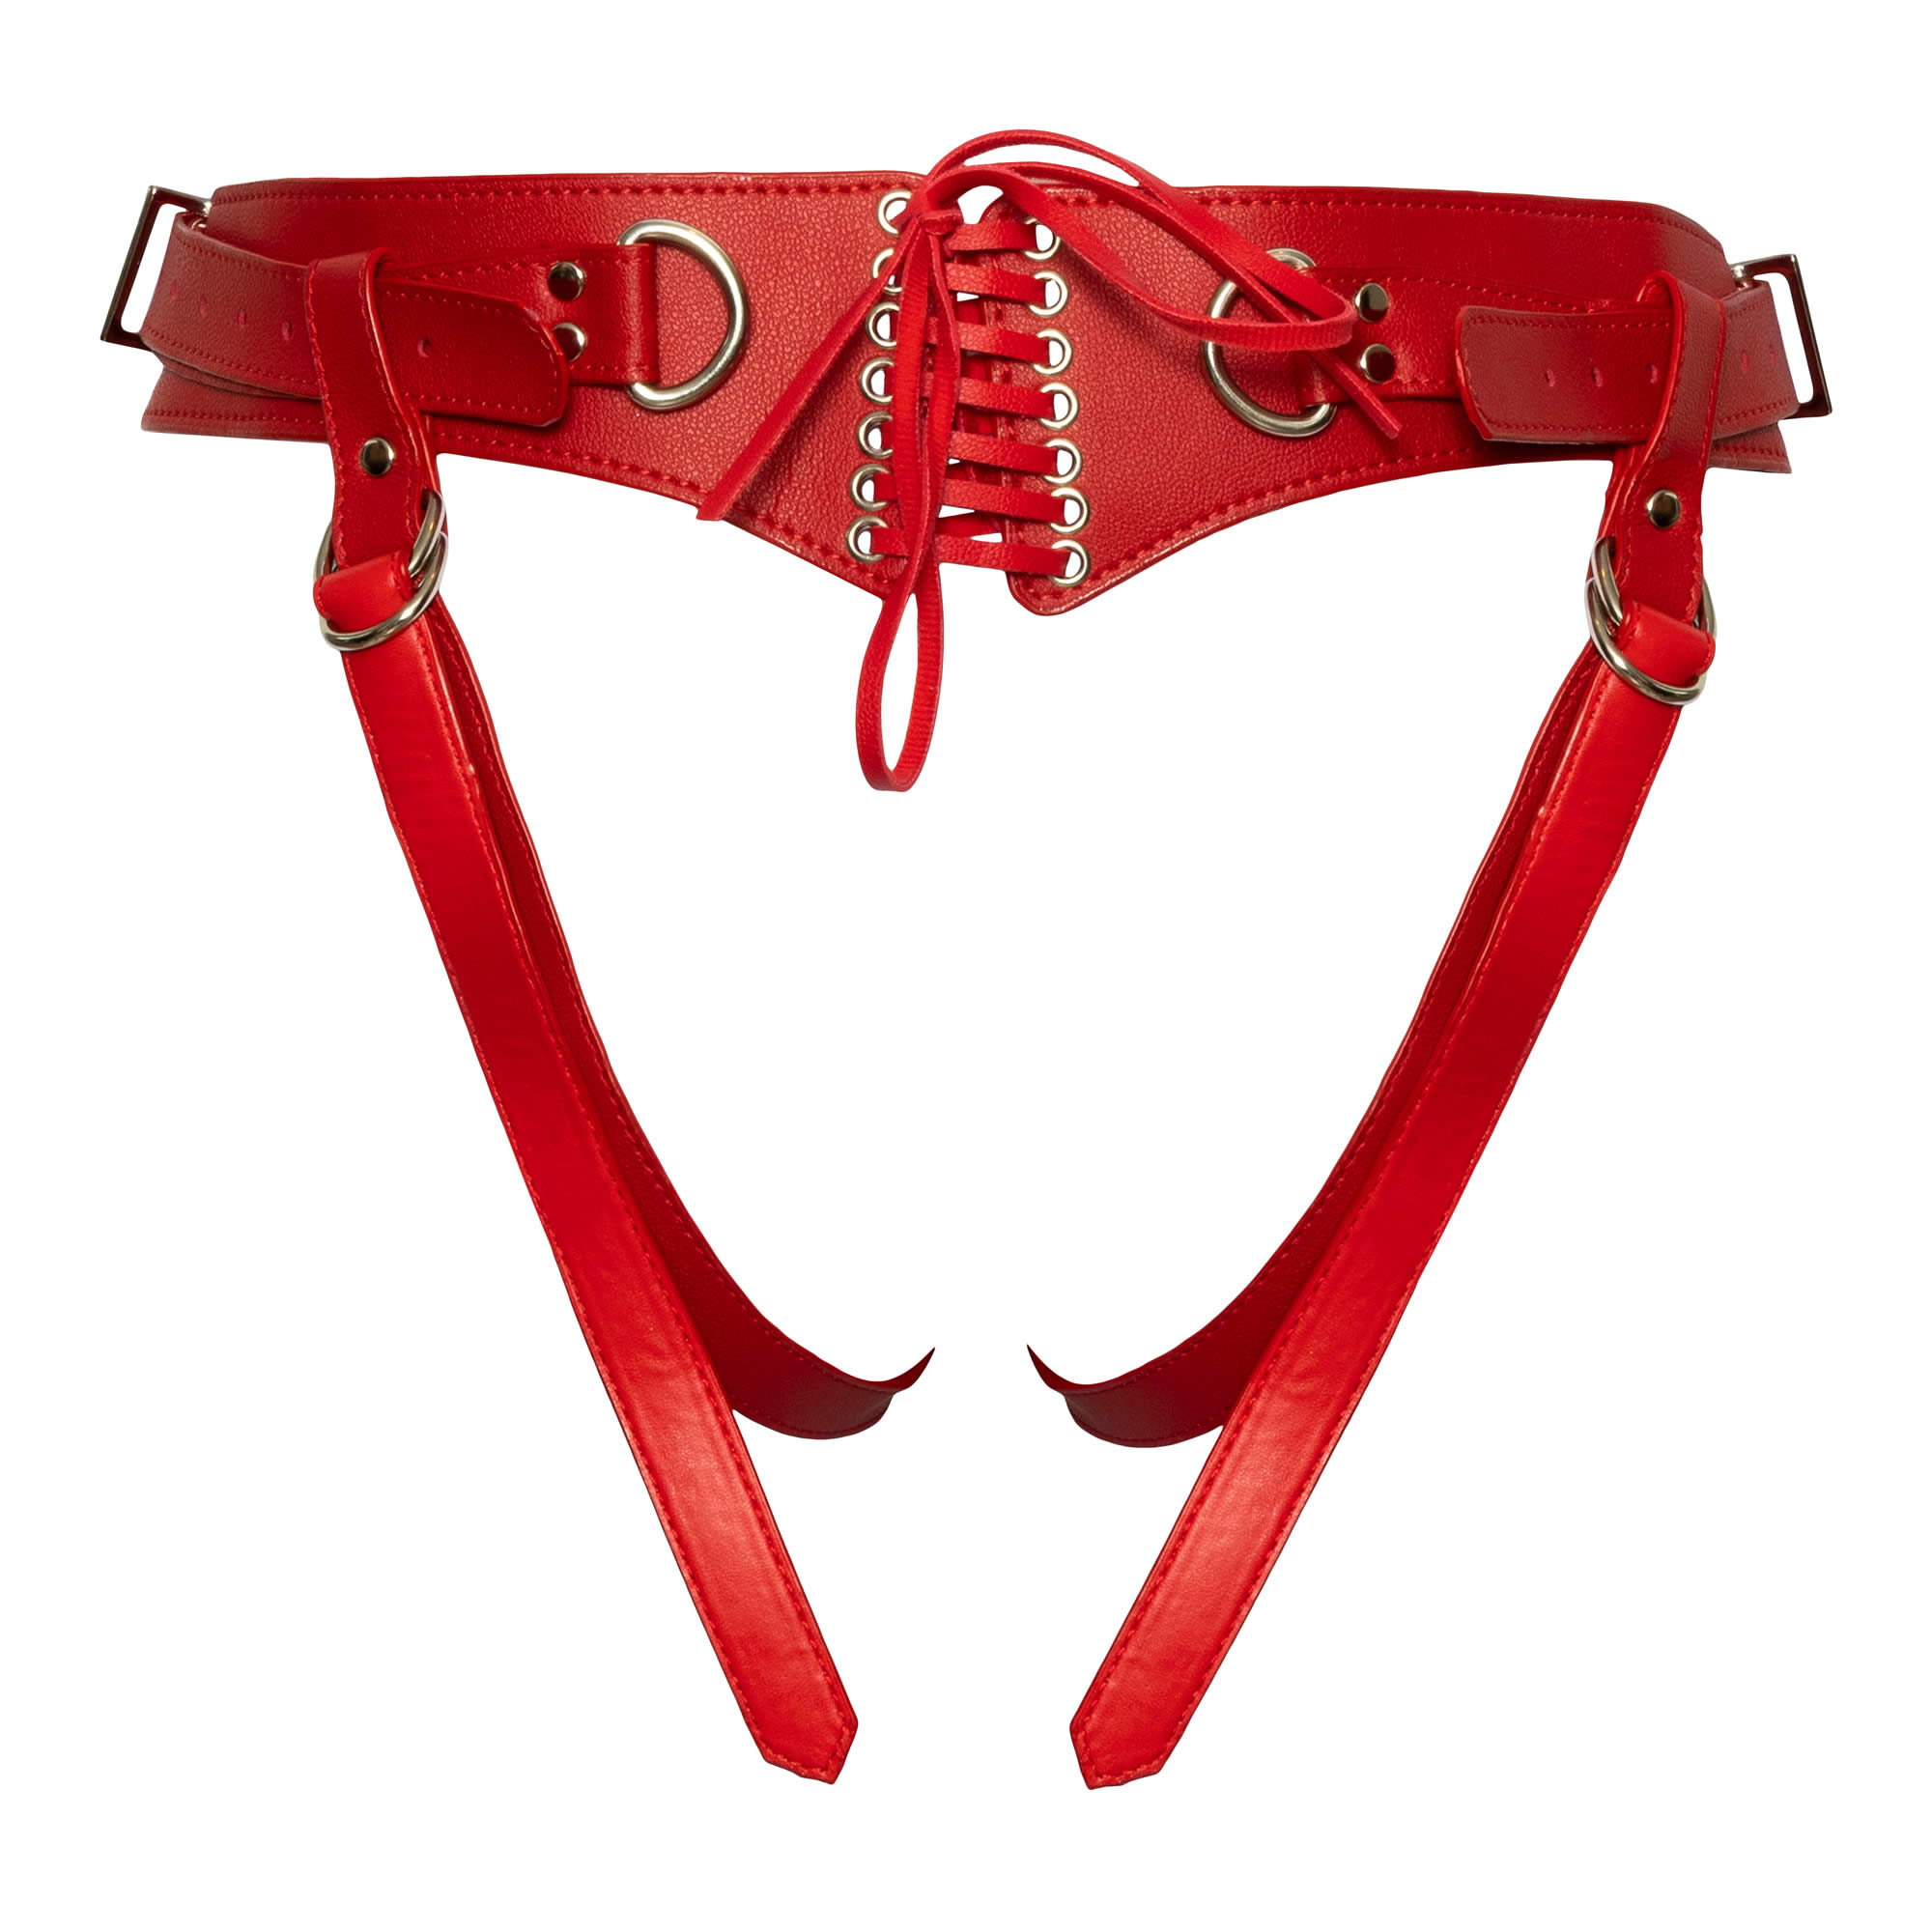 Bad Kitty Strap-On Harness in Red Leather Look